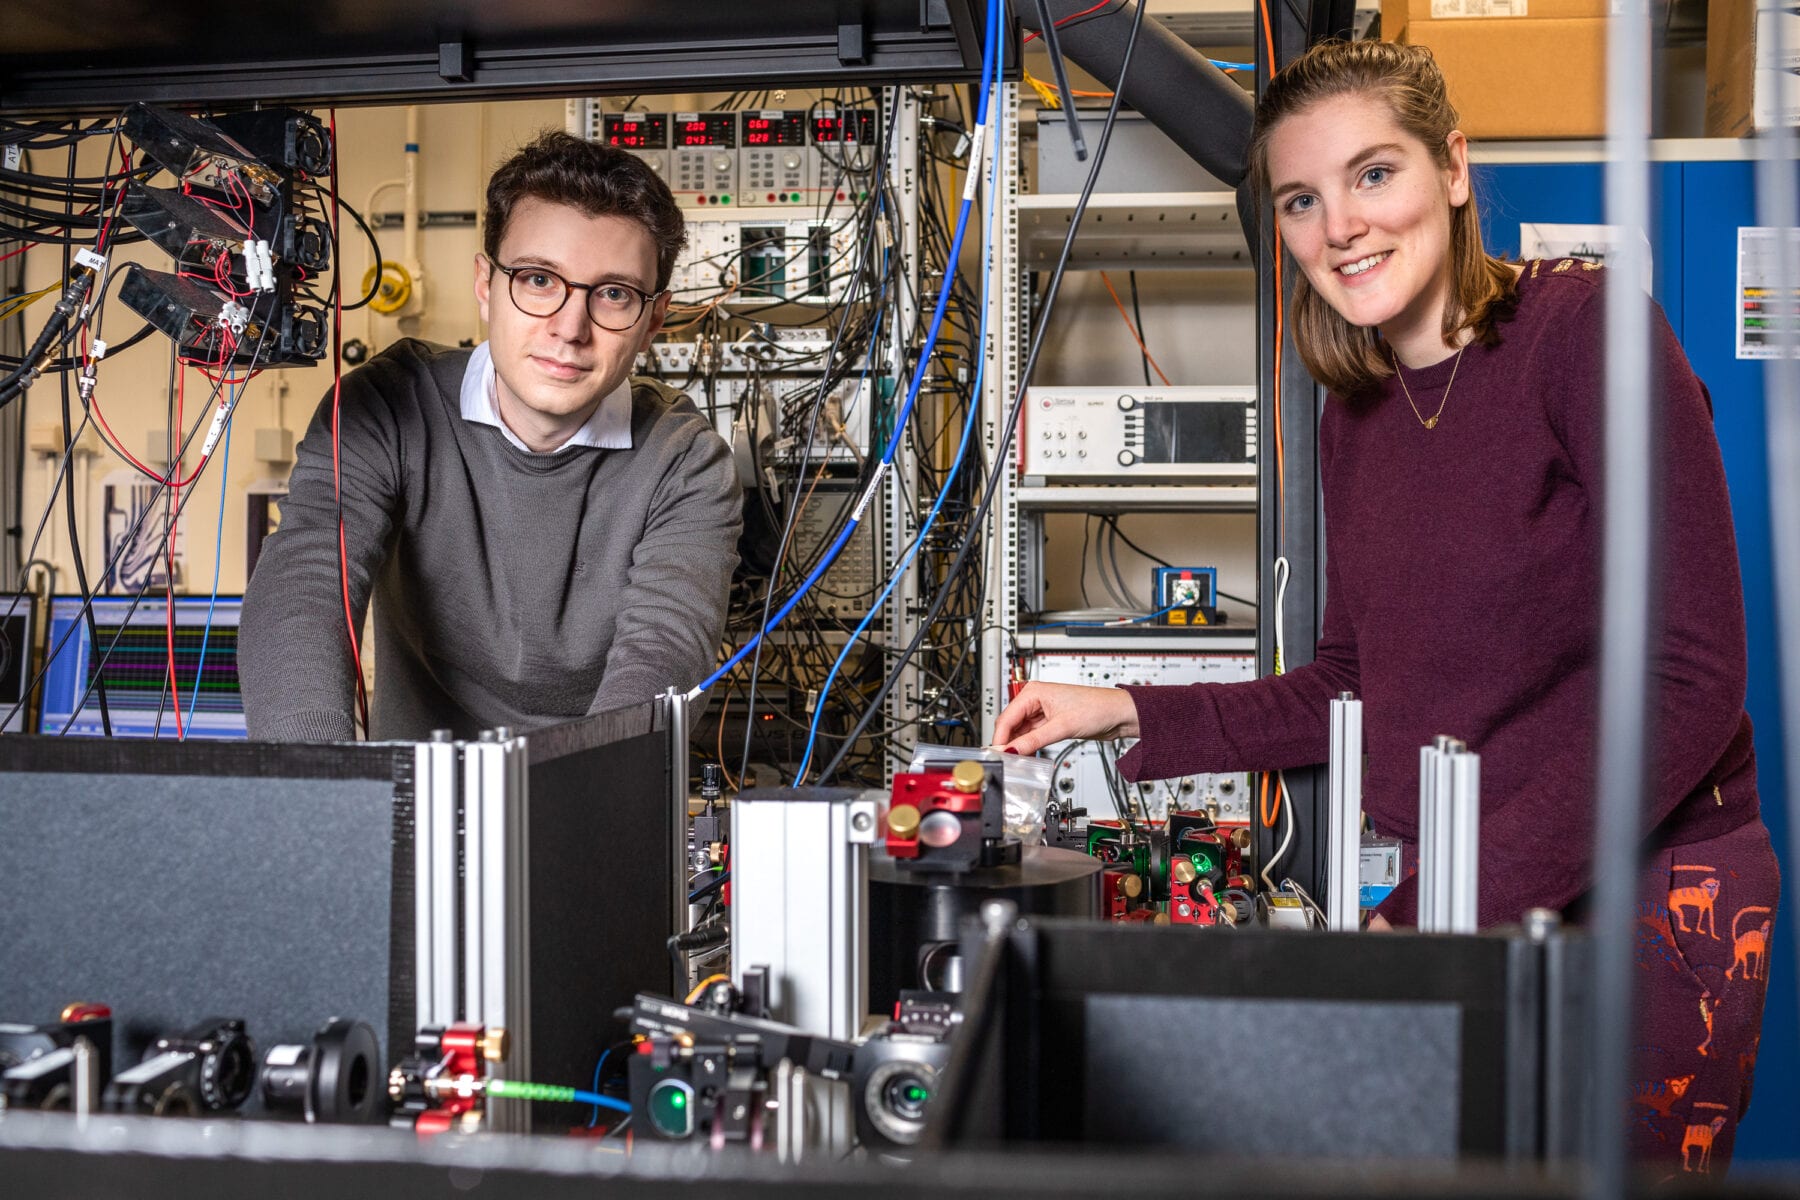 Co-authors Matteo Pompili (left) and Sophie Hermans (right), both PhD student in the group of Ronald Hanson, at one of the quantum network nodes.